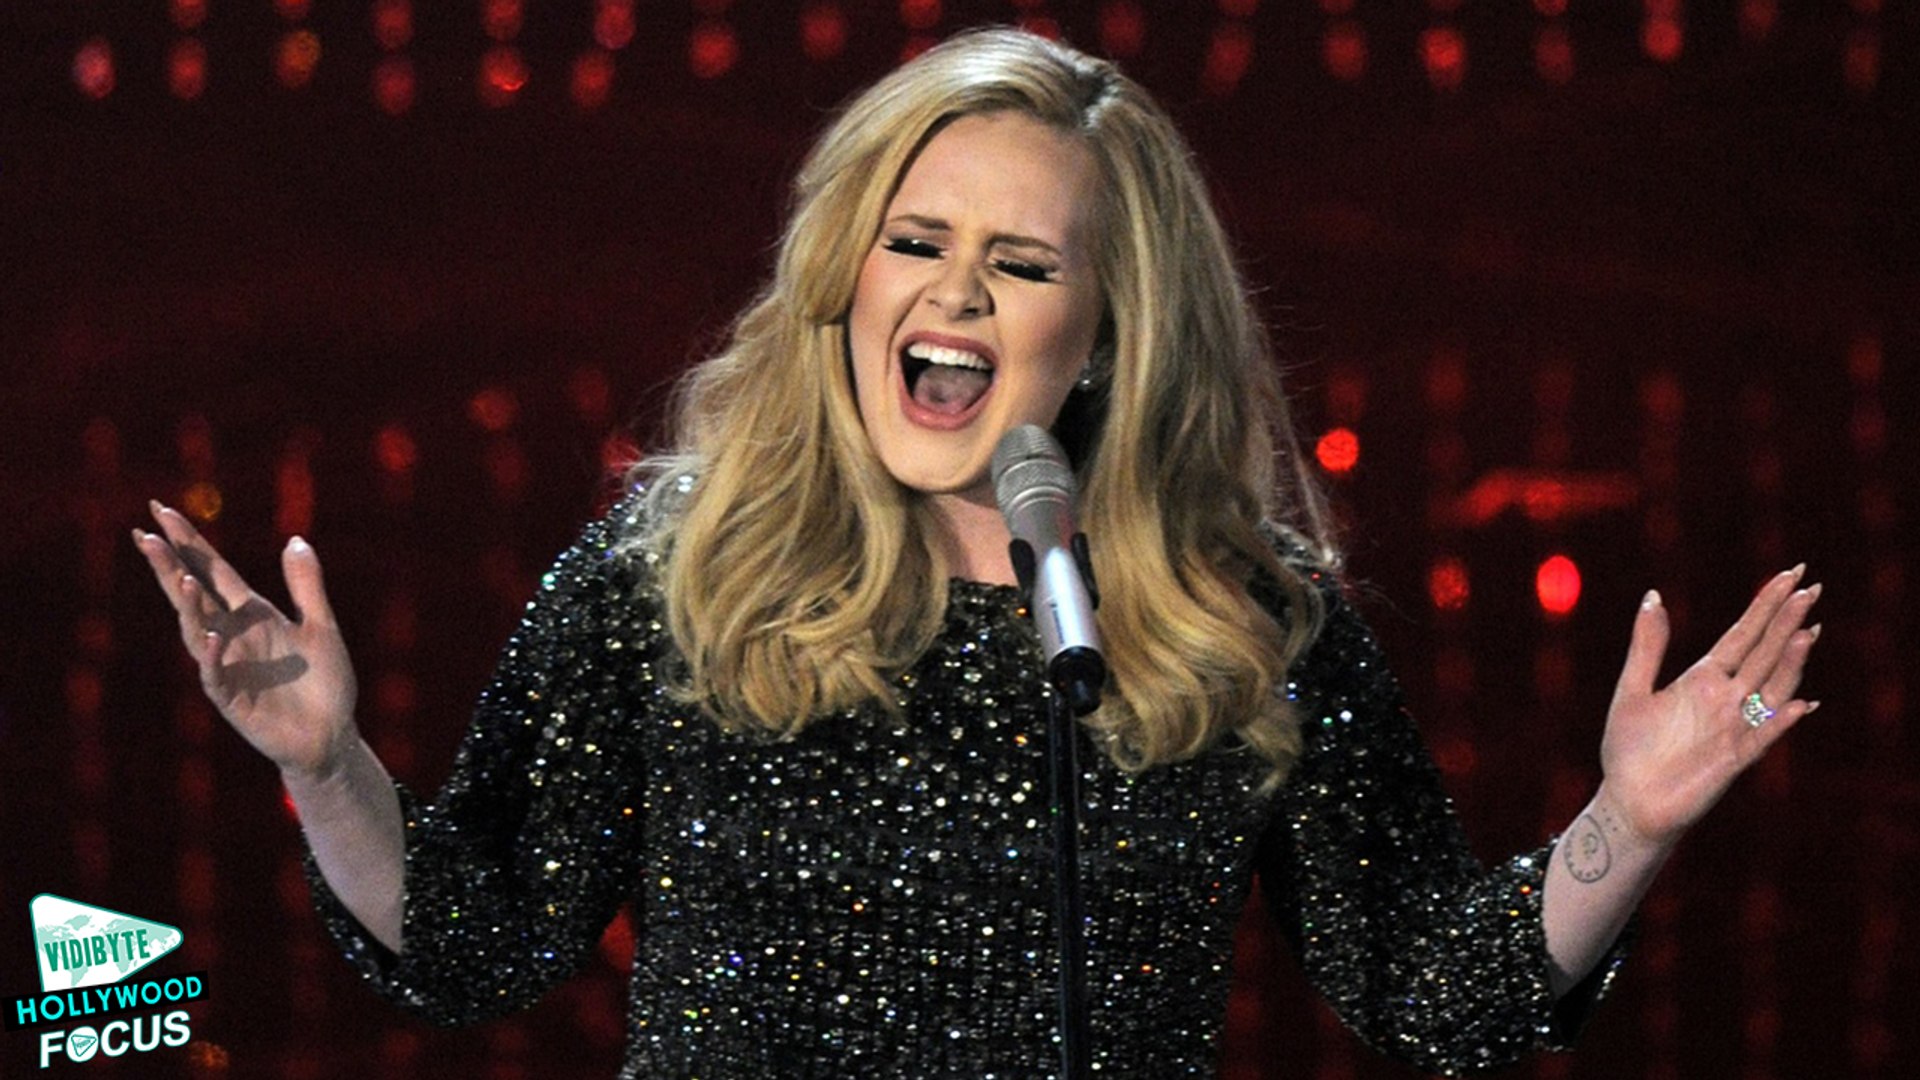 Adele Officially Releases When You Were Young Song - Listen